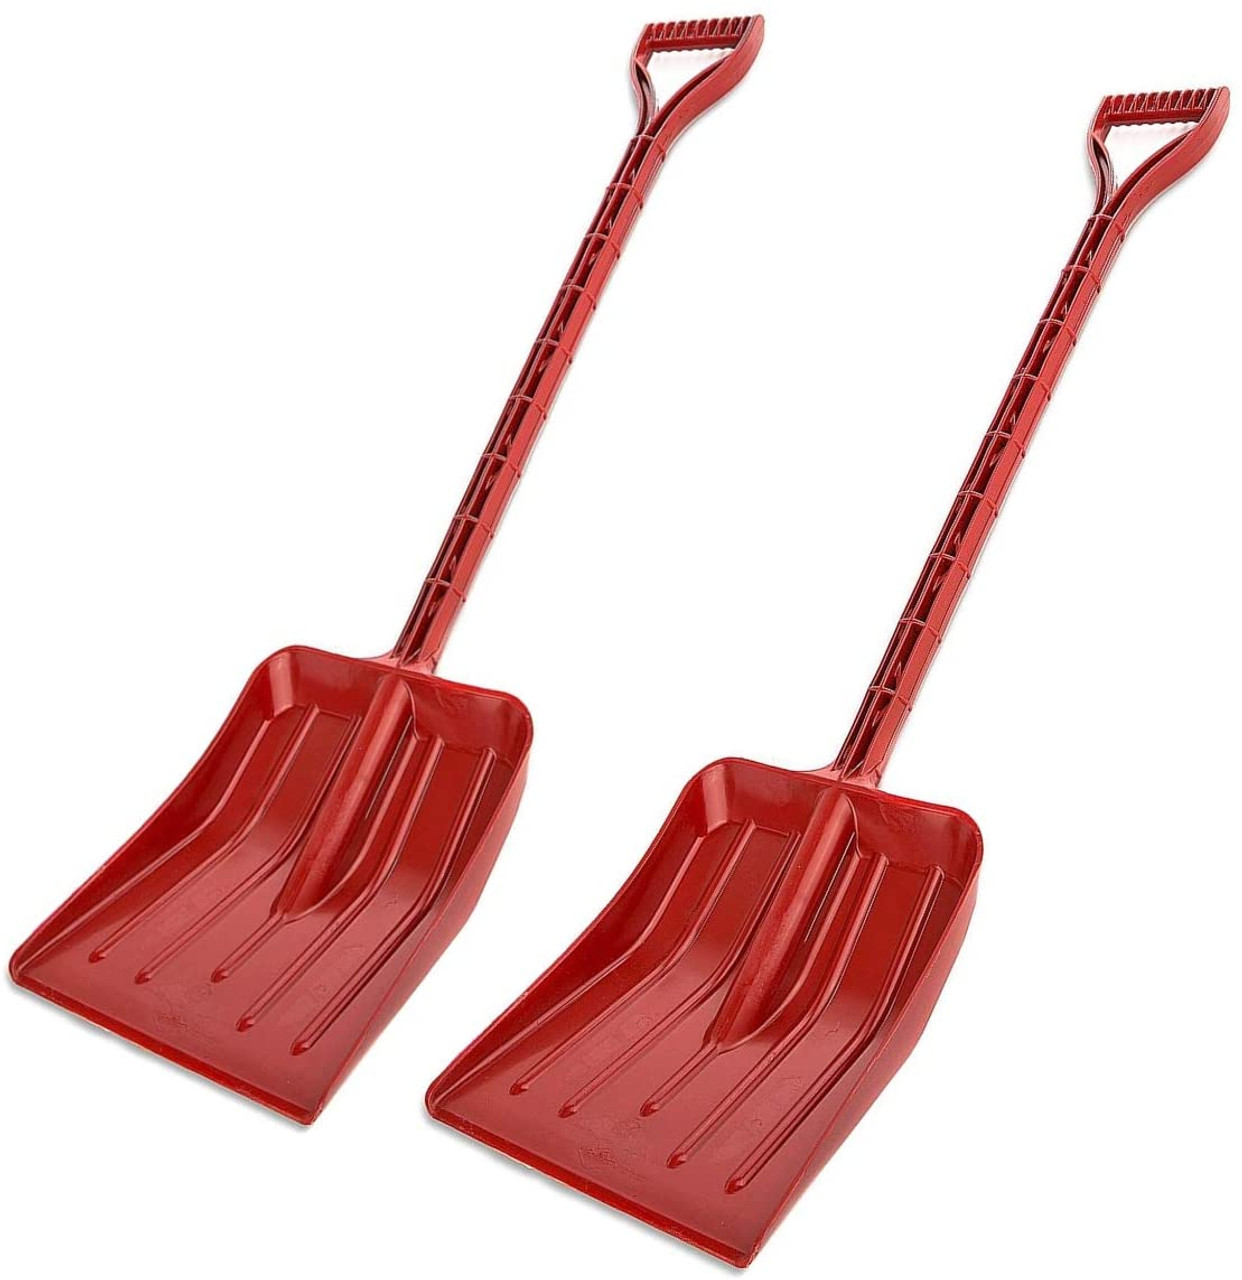 Extra Strength Single Piece Plastic Bend Proof Design Perfect Sized Snow Shovel for Kids Age 3 to 12 Safer Than Metal Snow Shovels 1, Red Rocky Mountain Goods Kids Snow Shovel